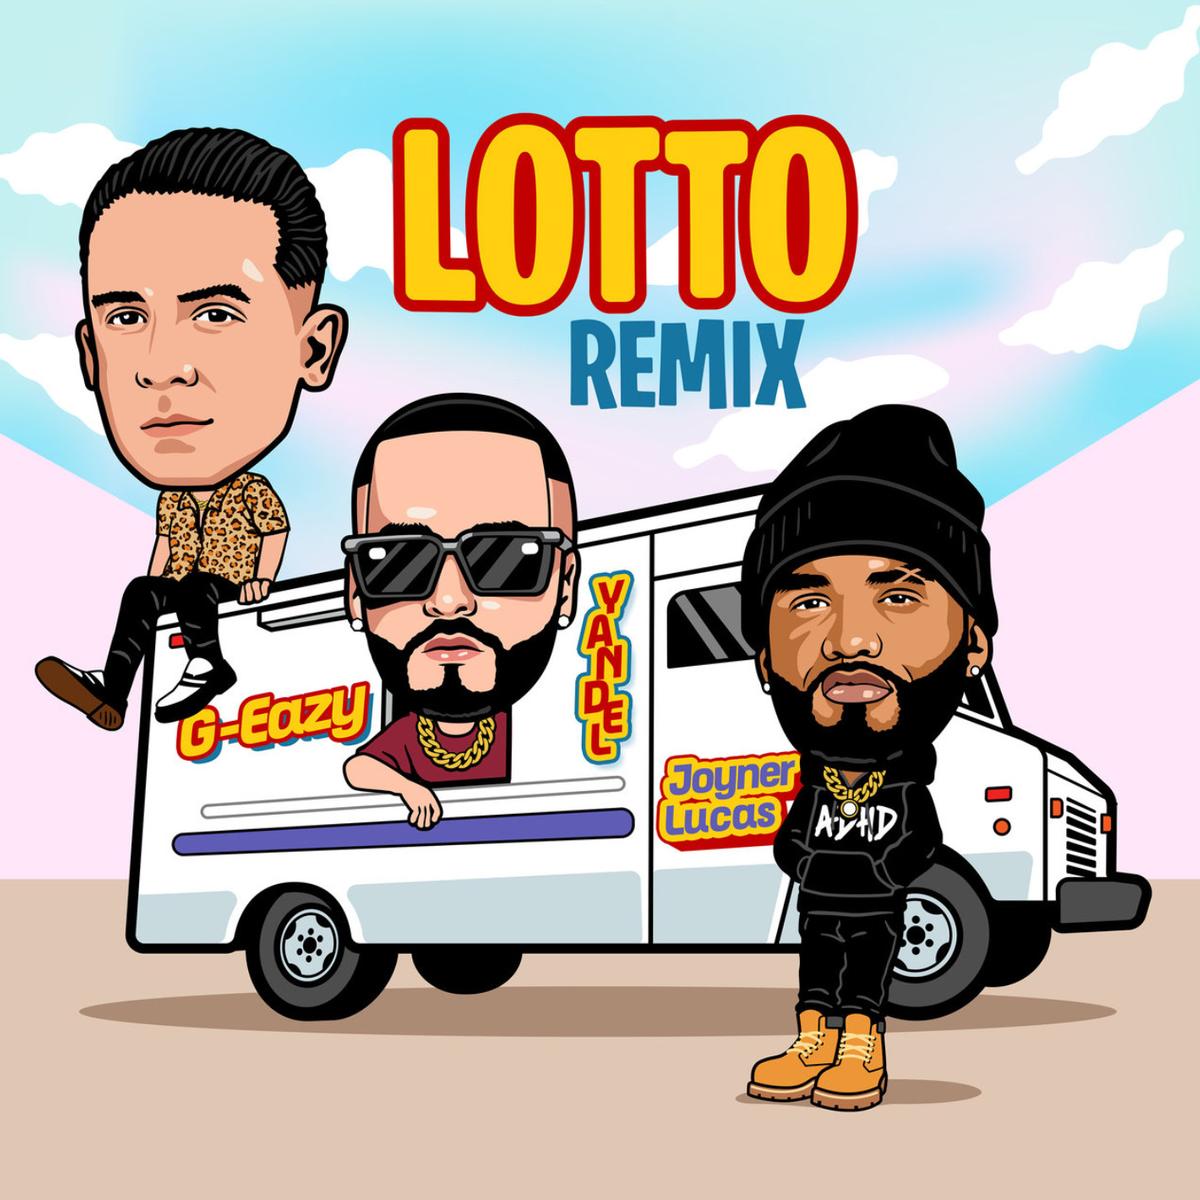 Joyner Lucas Calls On G-Eazy & Yandel For A Remix To “Lotto”